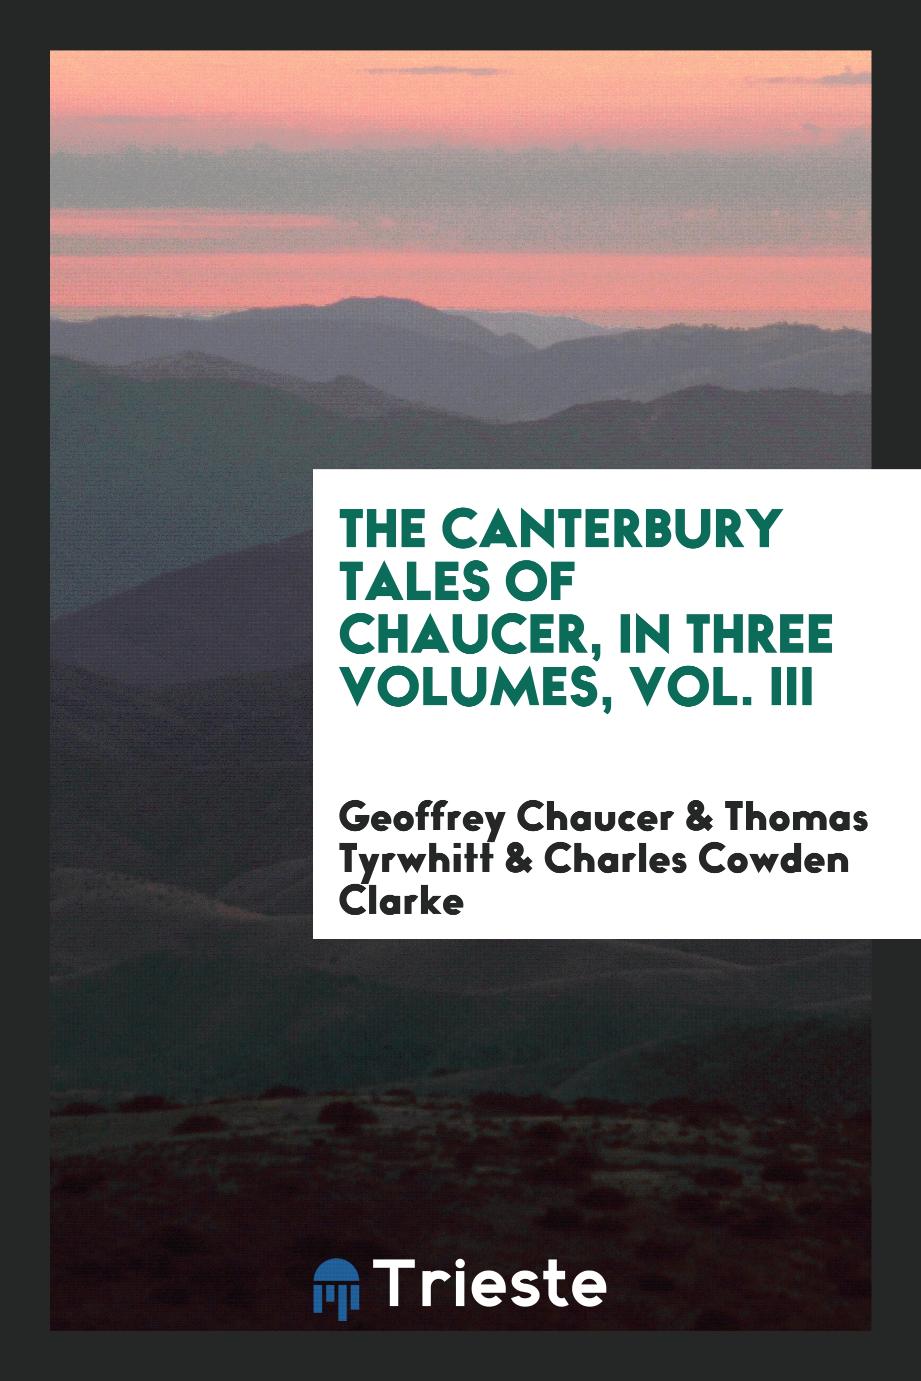 The Canterbury Tales of Chaucer, in Three Volumes, Vol. III